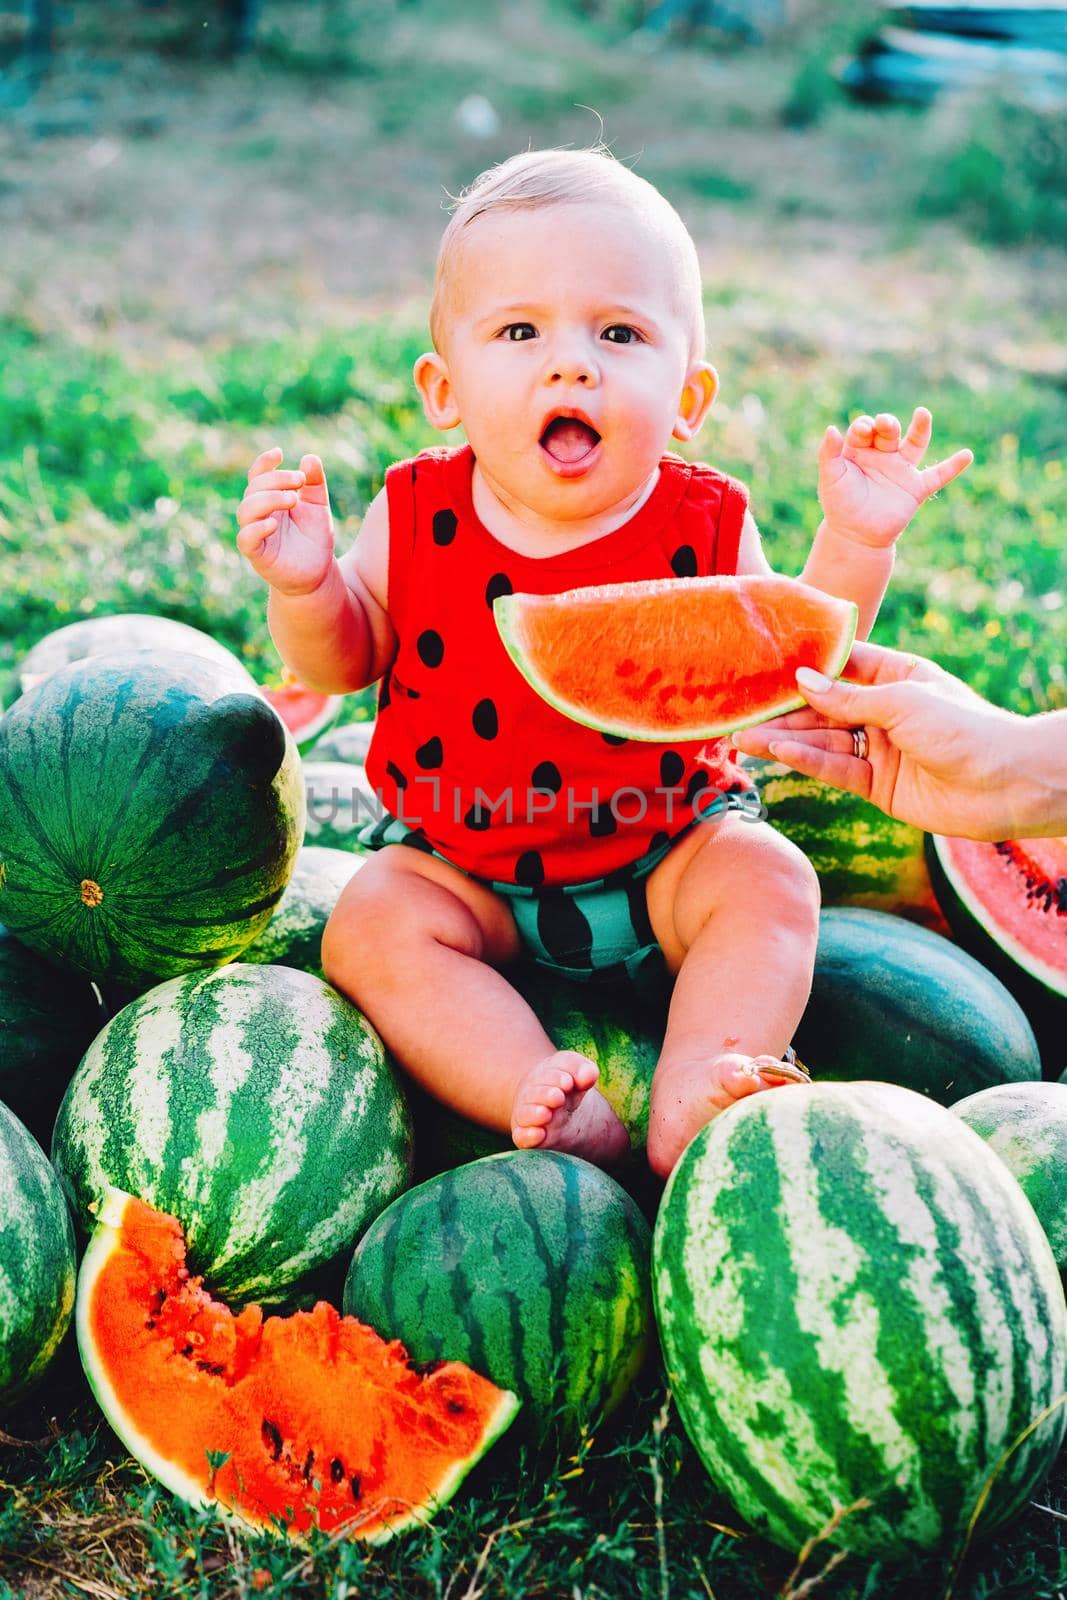 Happy little baby boy in funny costume sitting and eating slice of watermelon on field or garden. Happy Infant child smiling. Kid eat fruit outdoors. by kristina_kokhanova